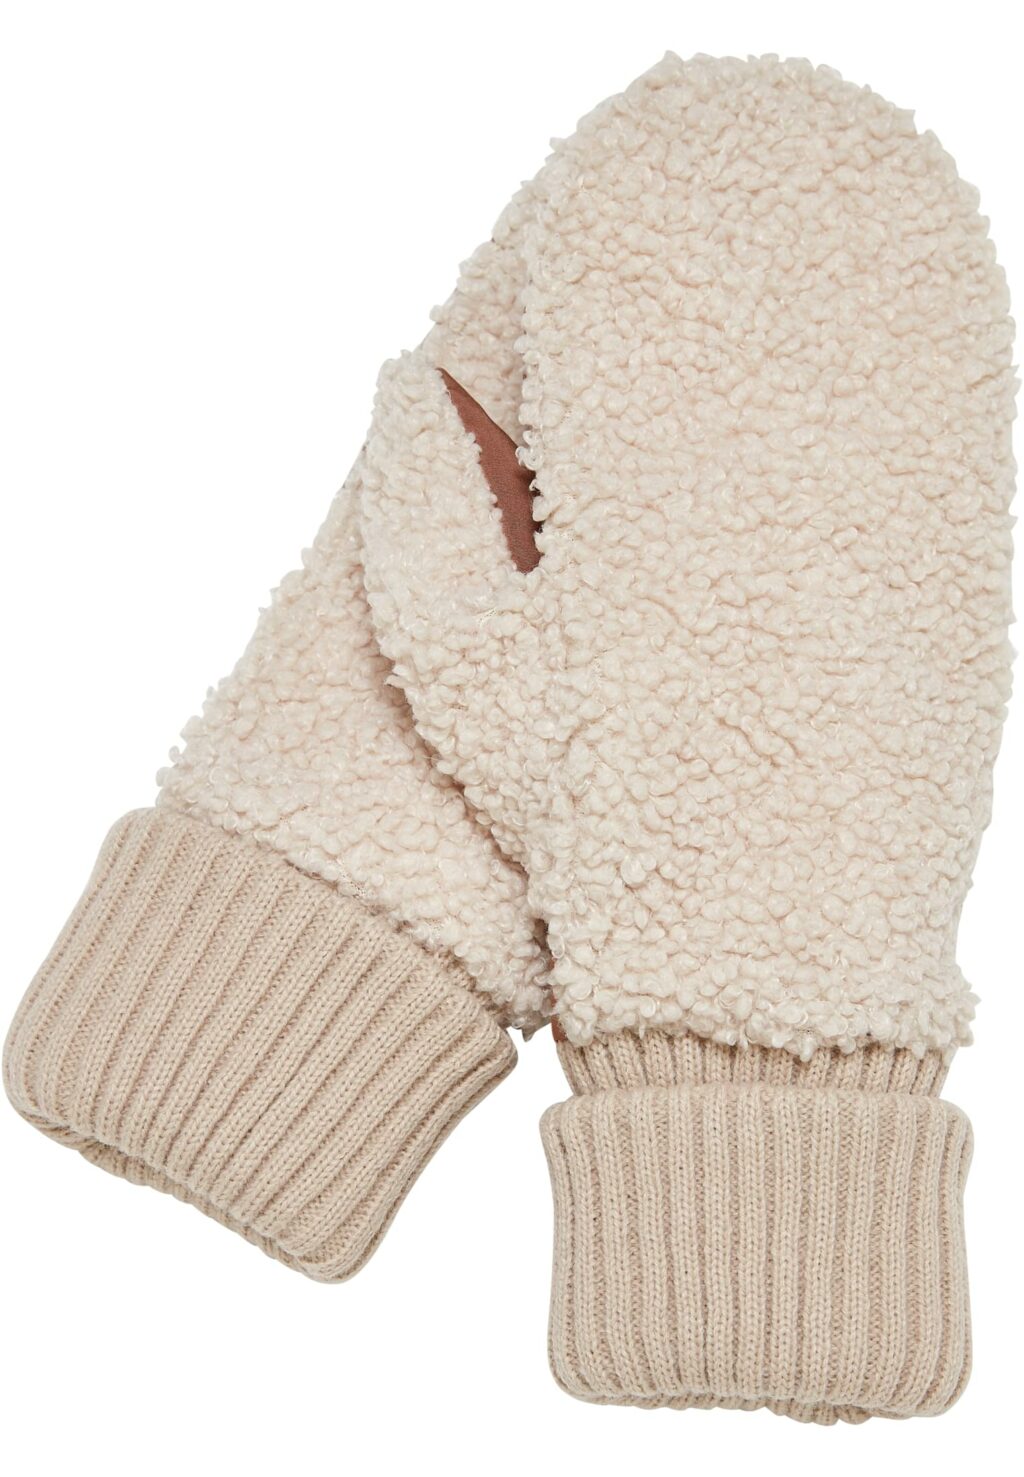 Basic Sherpa Gloves toffee/buttercream TB5648